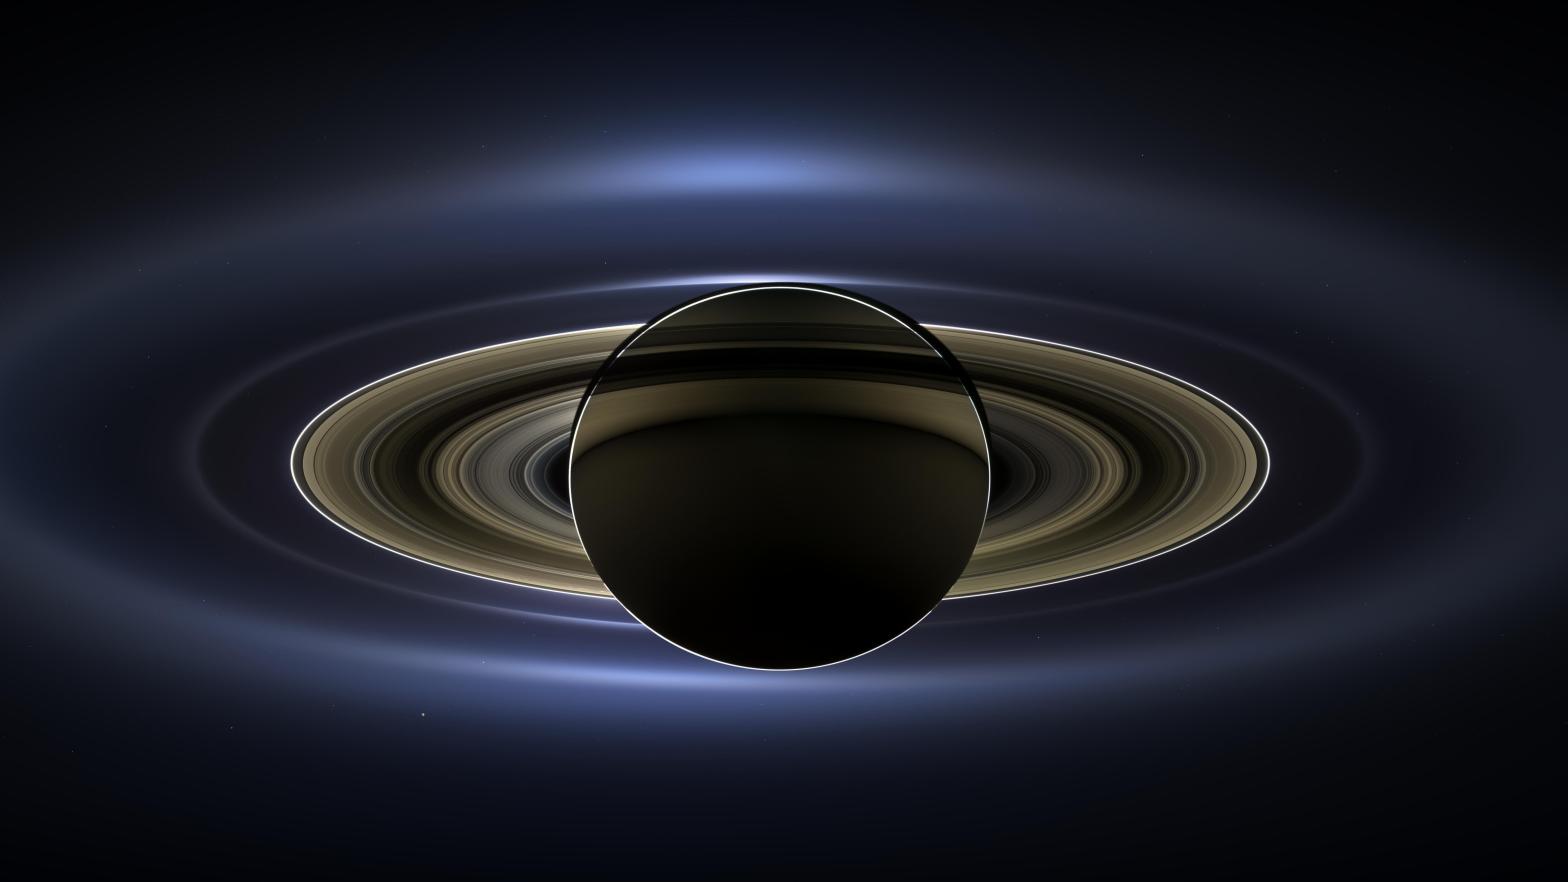 Saturn's rings are 100 million years old and are made up of chunks of water ice.  (Image: NASA/JPL-Caltech/SSI)